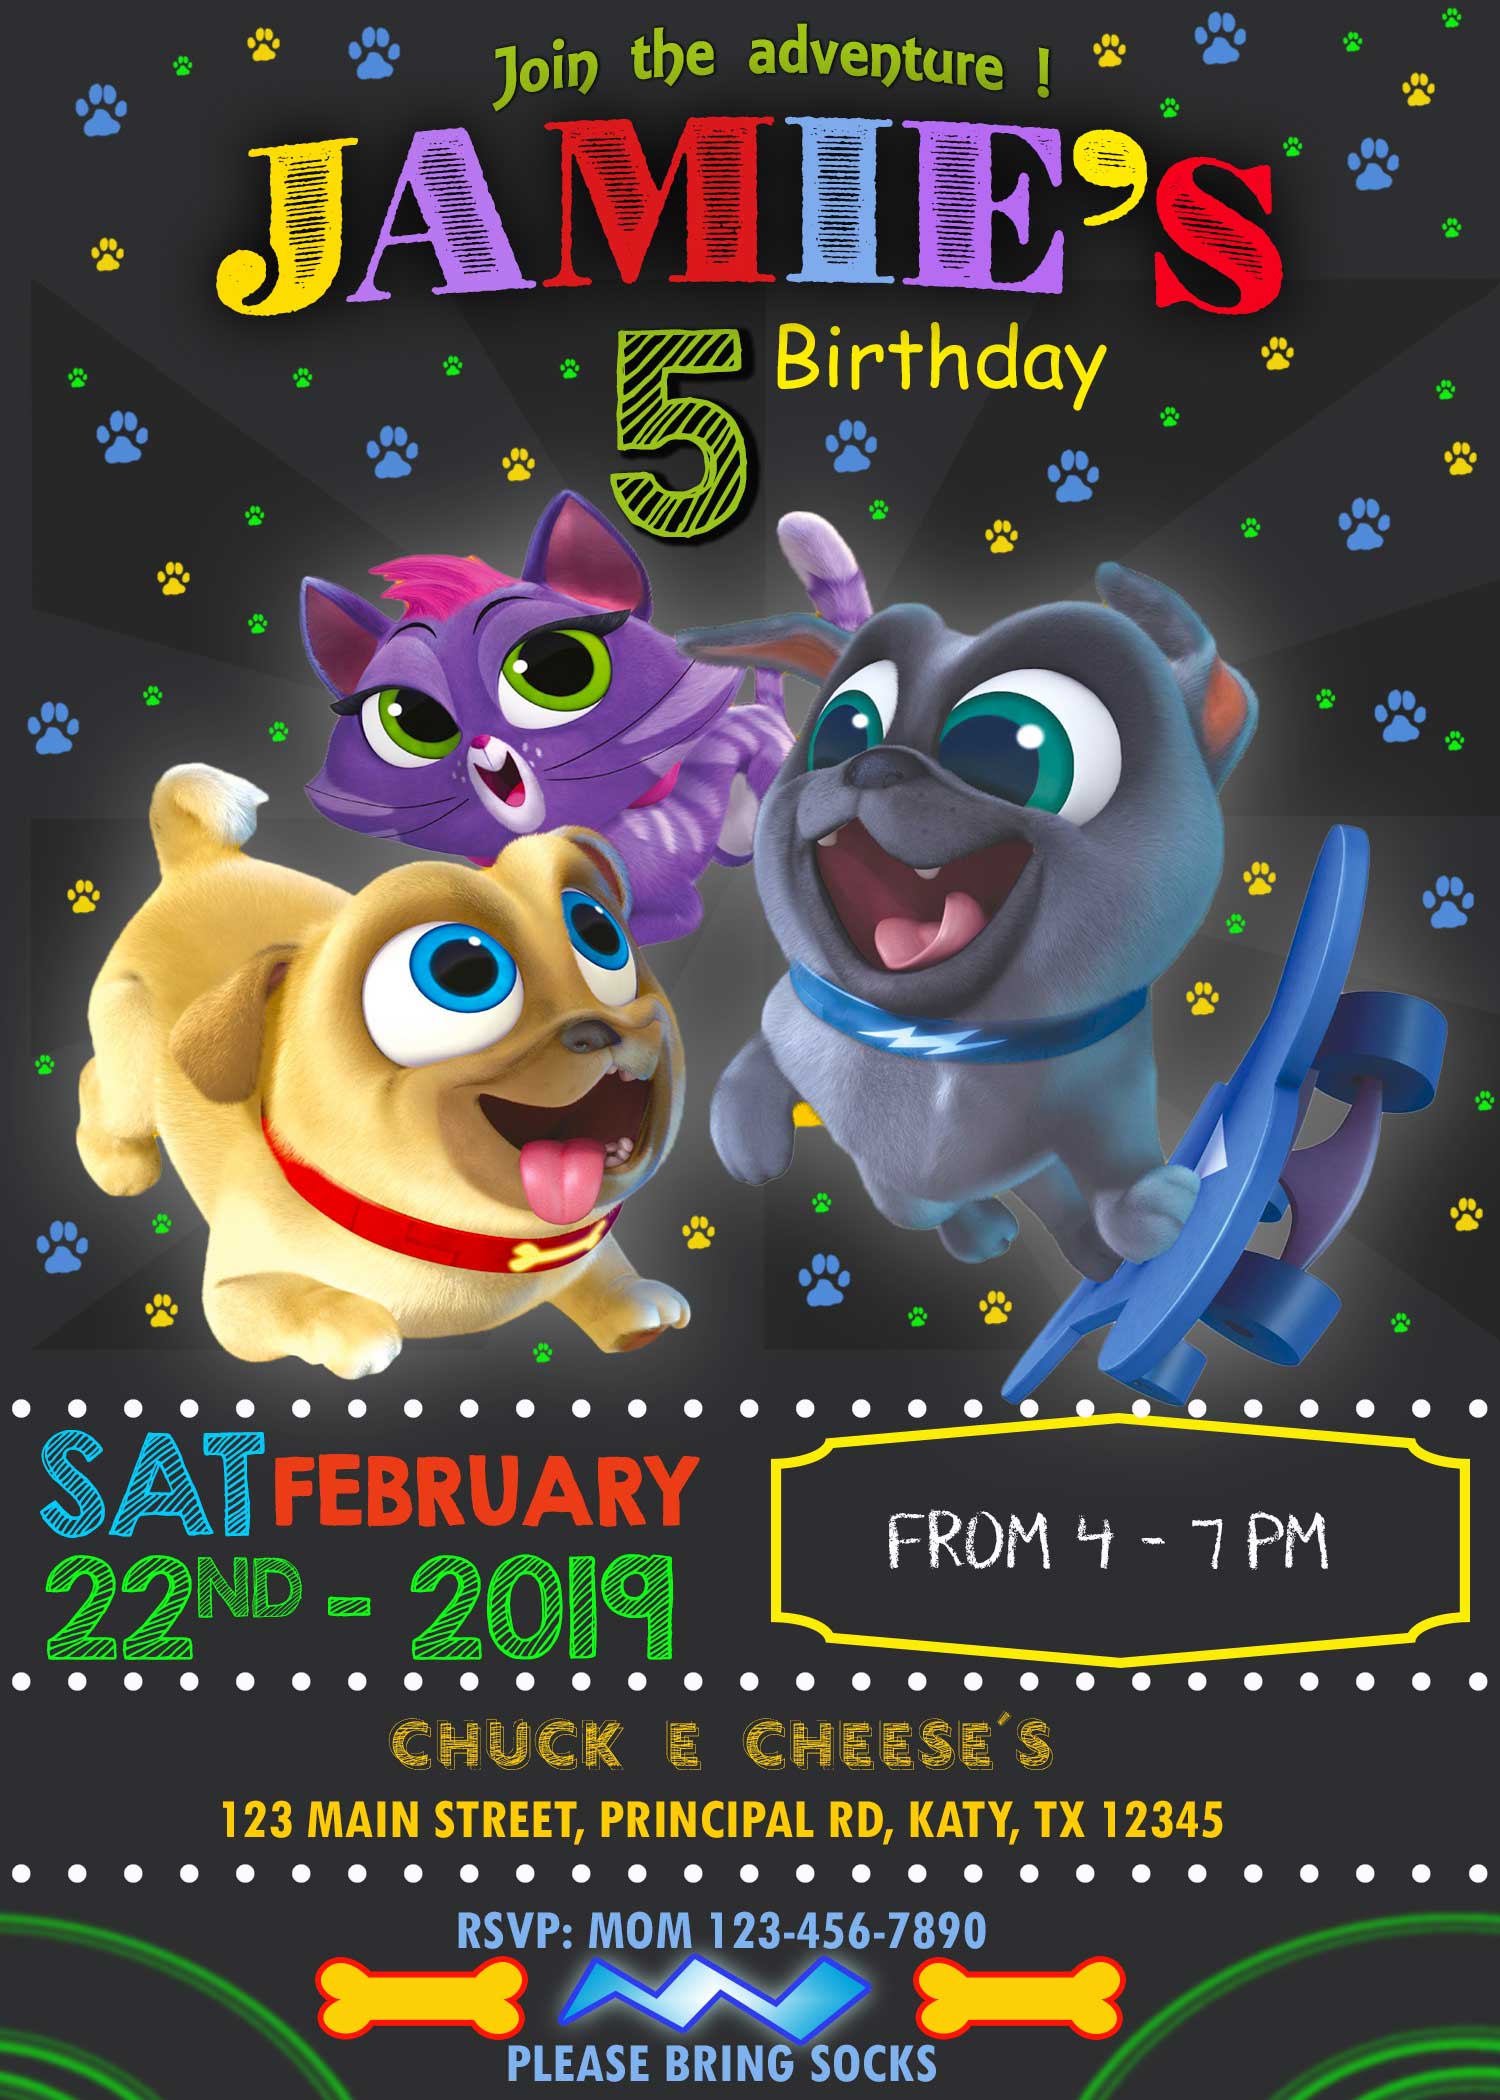 Puppy Dog Pals birthday party invitations personalised invites x 10 